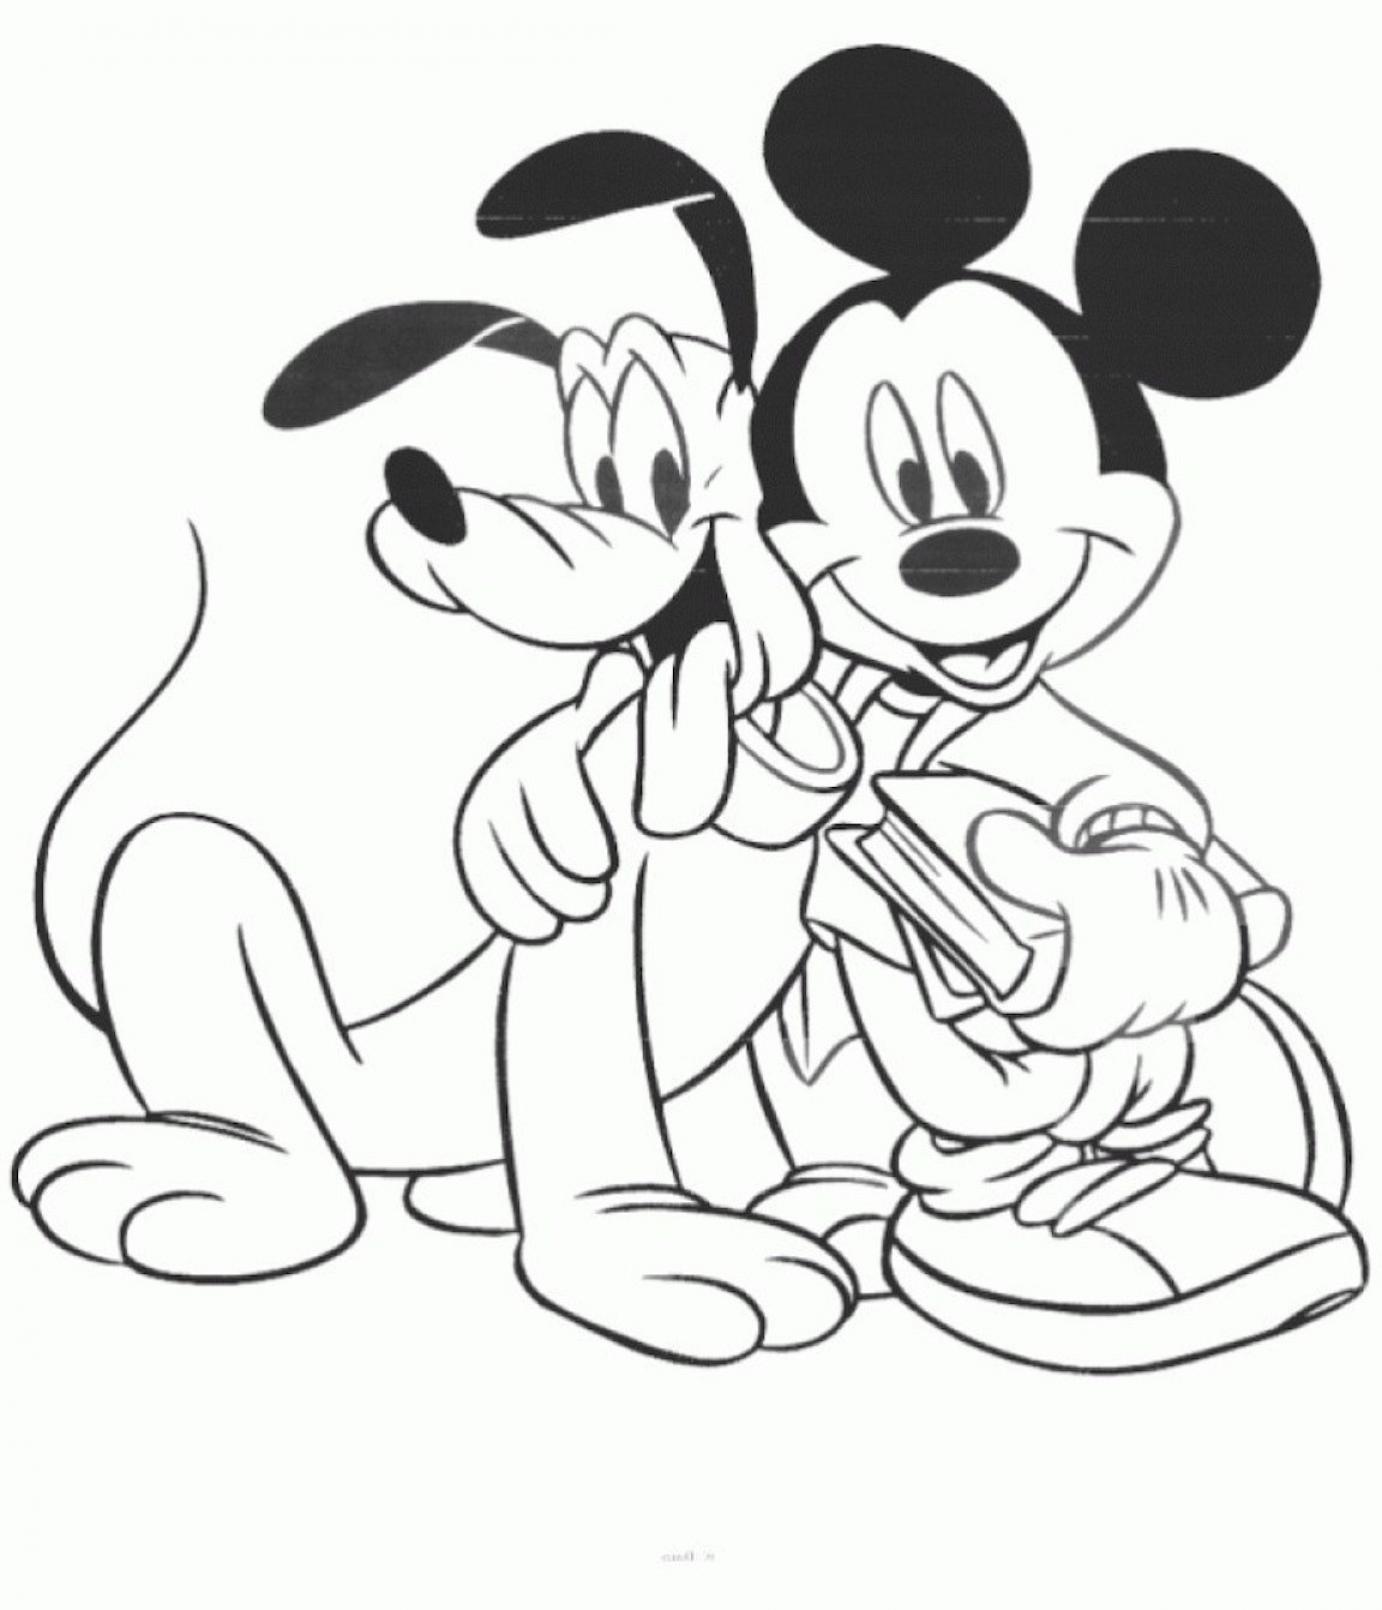 Mickey Mouse and Pluto Coloring Pages - SheetalColor.com